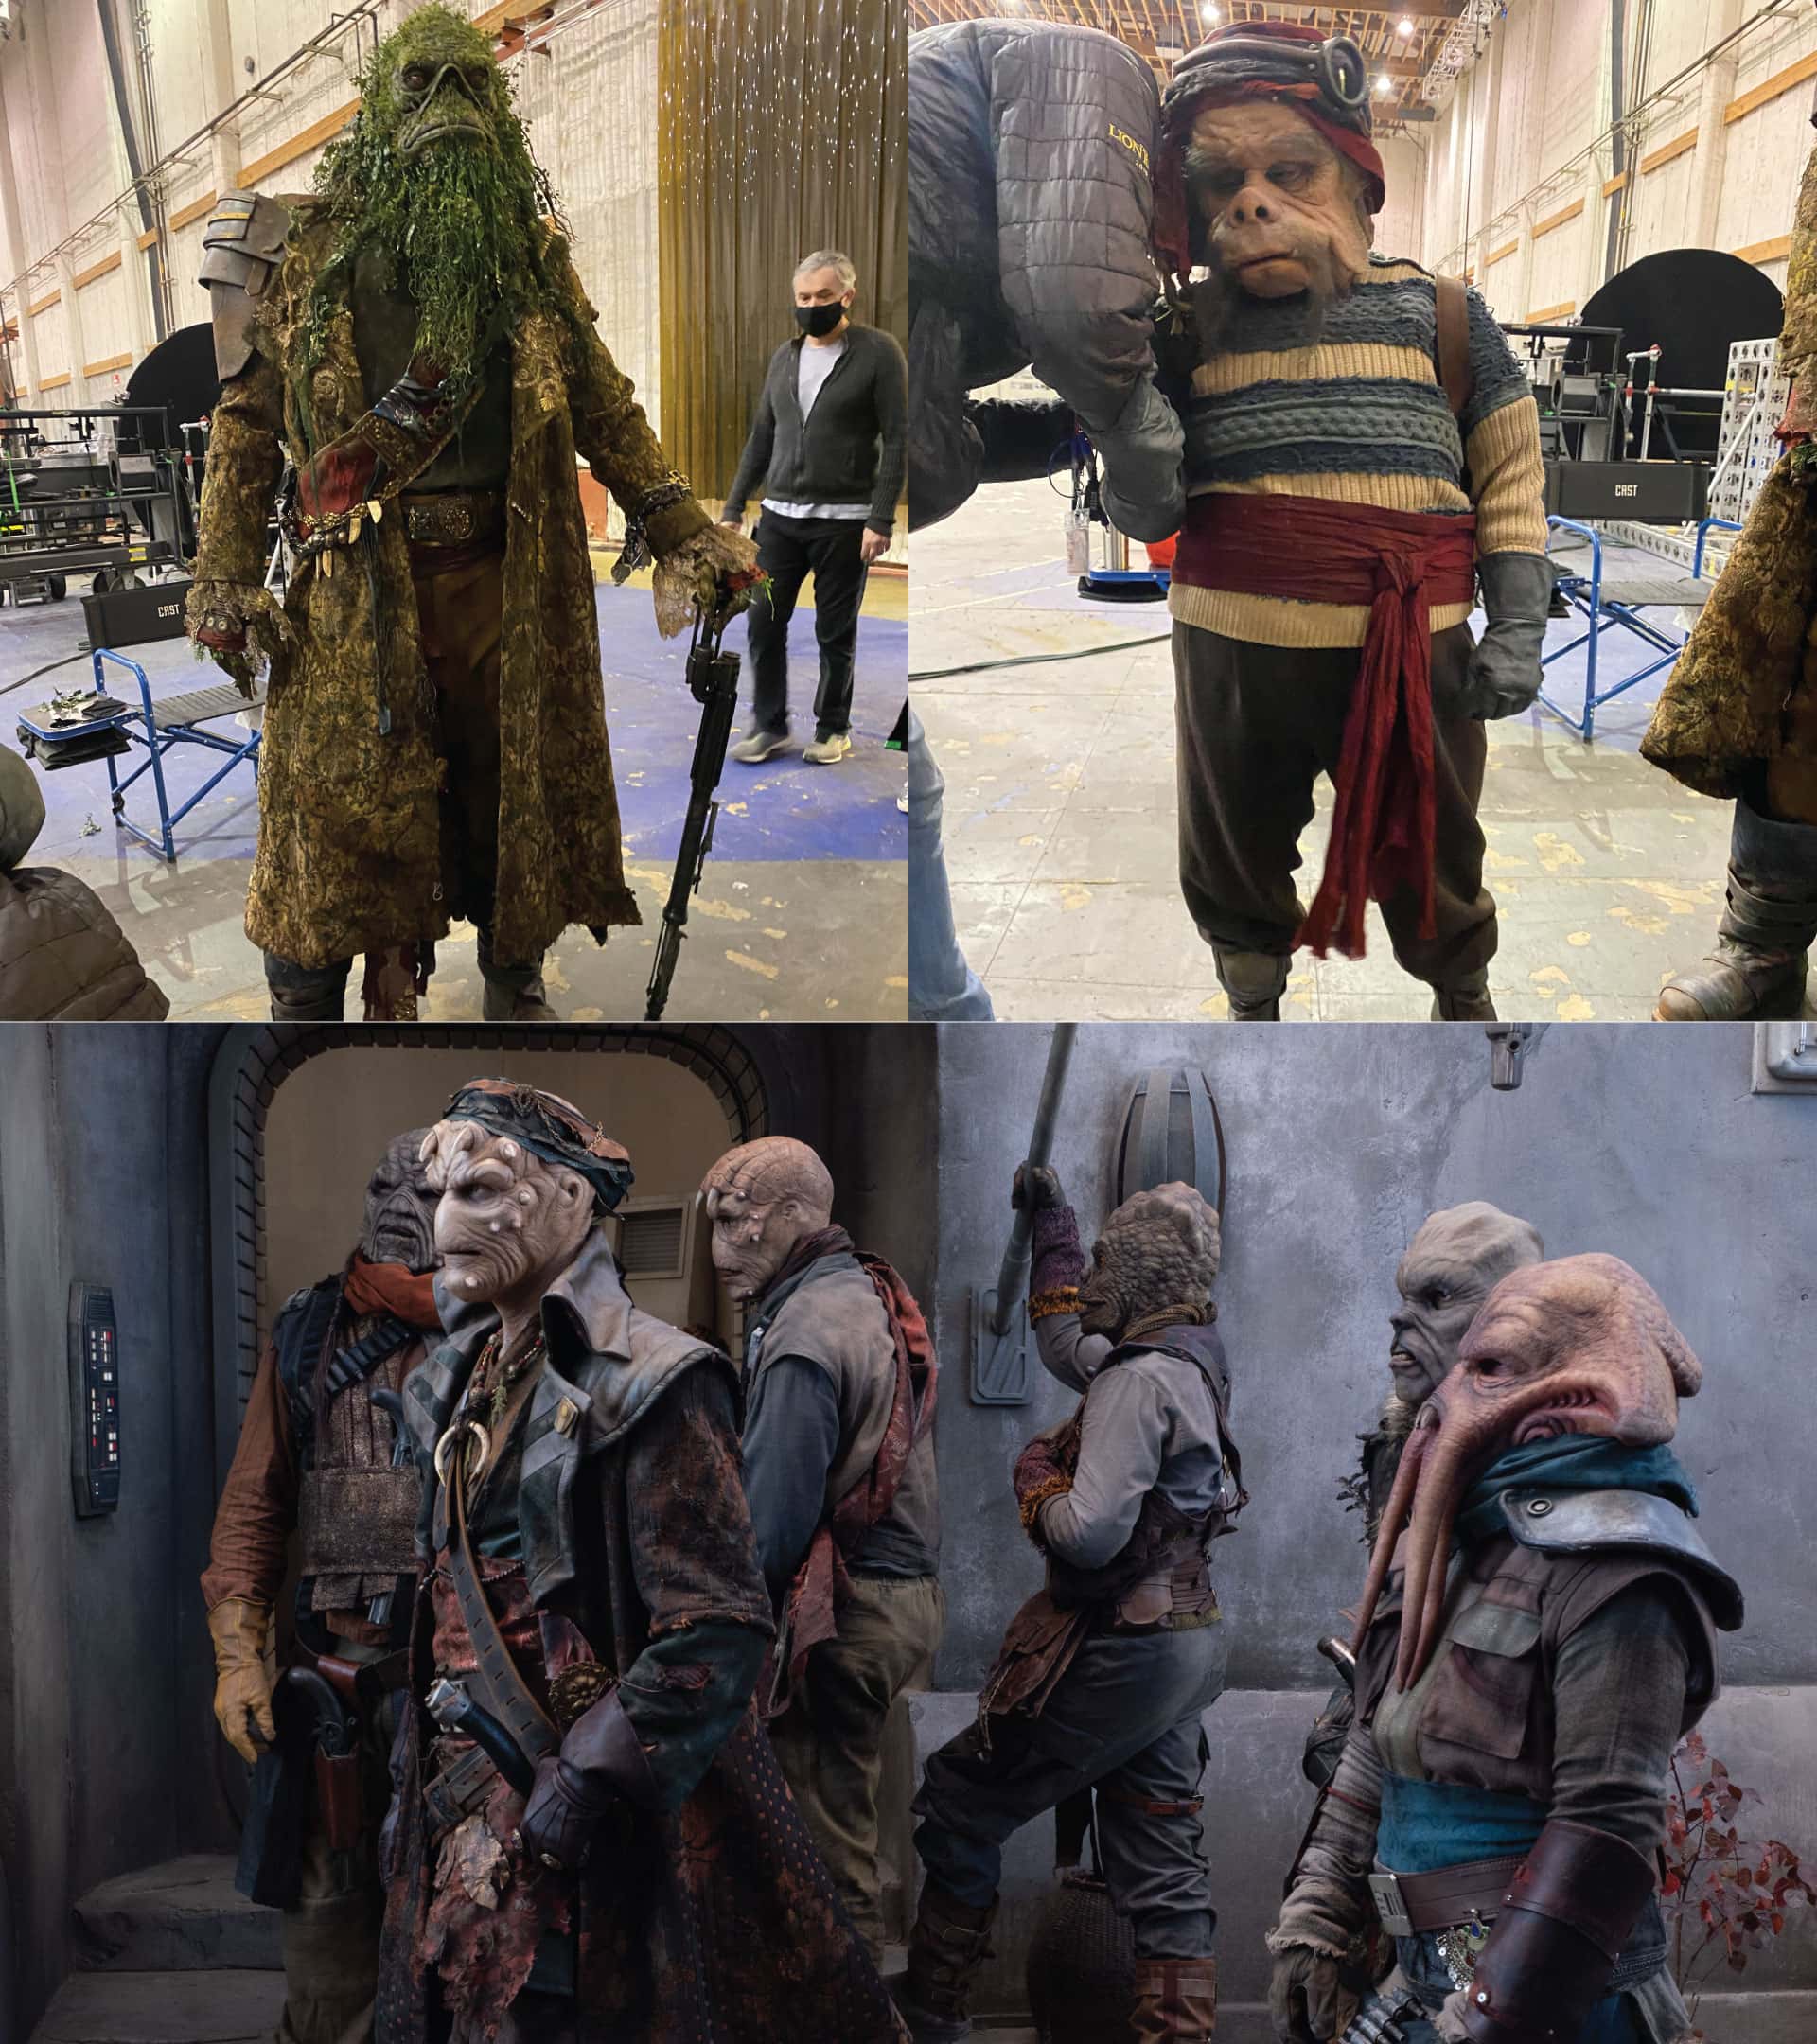 The Mandalorian Season Three Pirates. Left: Gorian Shard (Carey Jones) fitting. Right: Pirate Coxswain (Misty Rosas) fitting. Bottom: Pirates in the courtyard from Chapter 17: The Apostate - Lucasfilm Ltd.